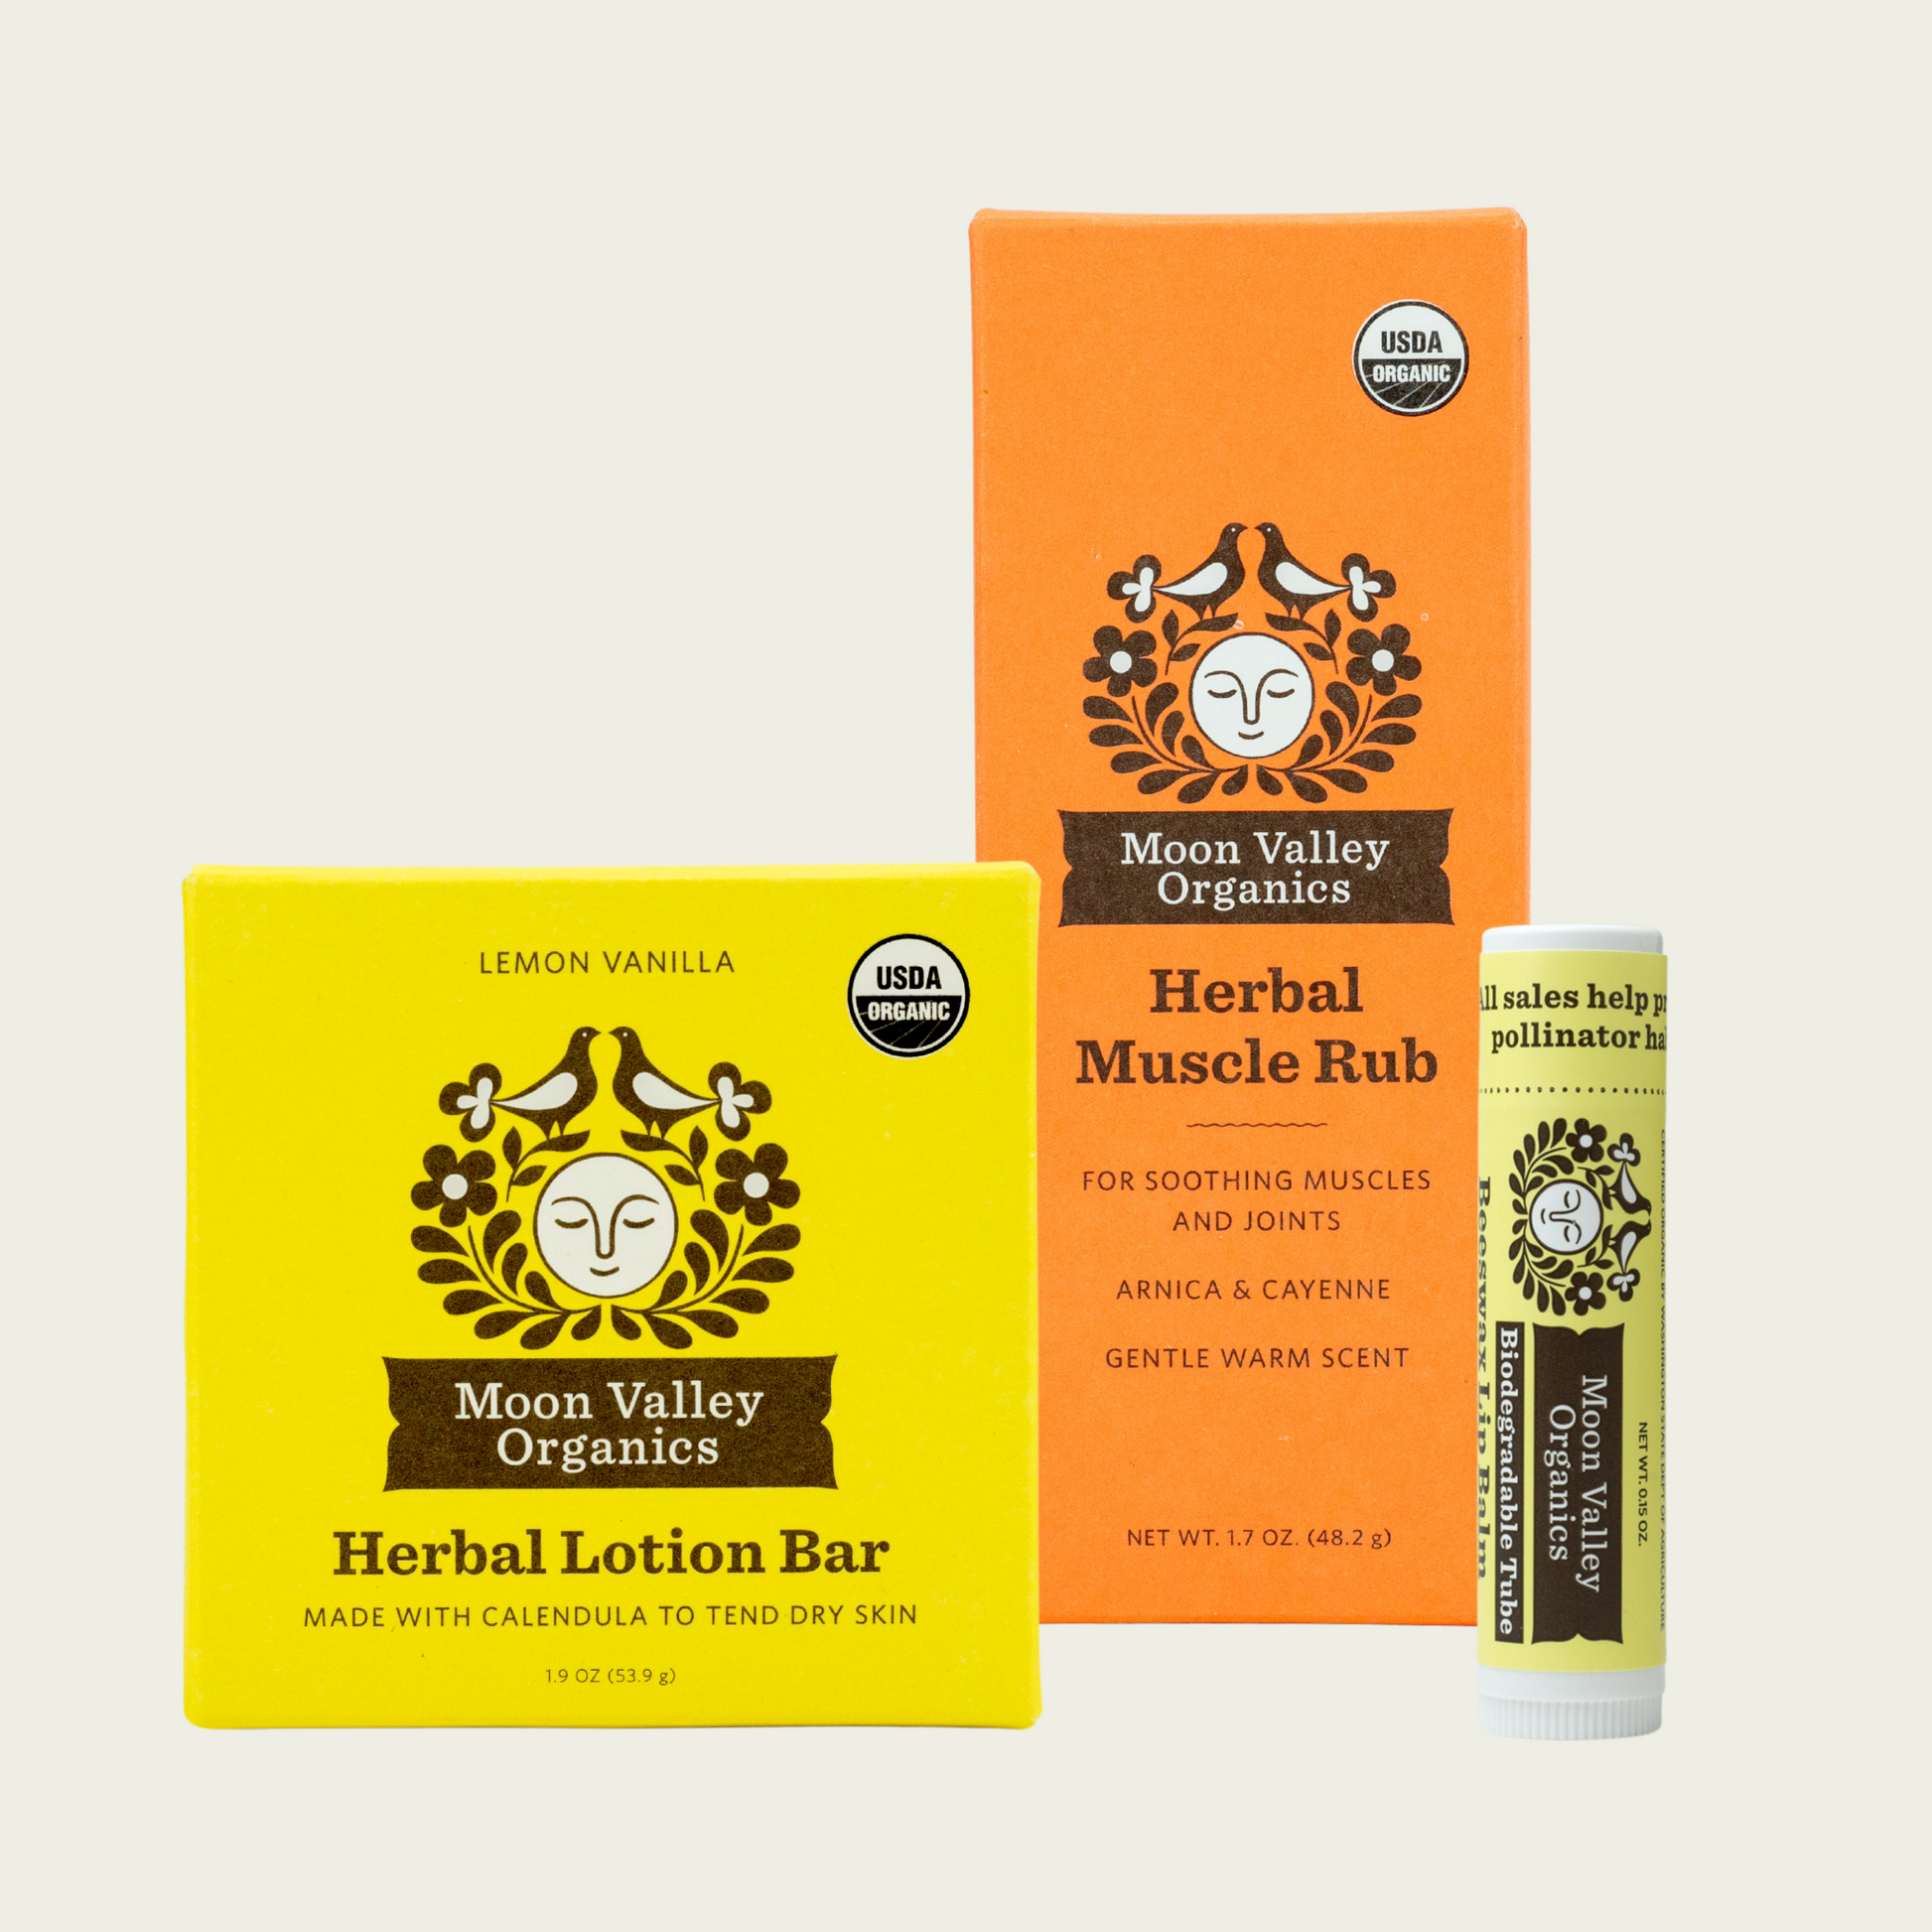 Moon Valley Organics Natural Body Collection Herbal Muscle Rub with Lip Balm and Lotion Bar Front Boxes